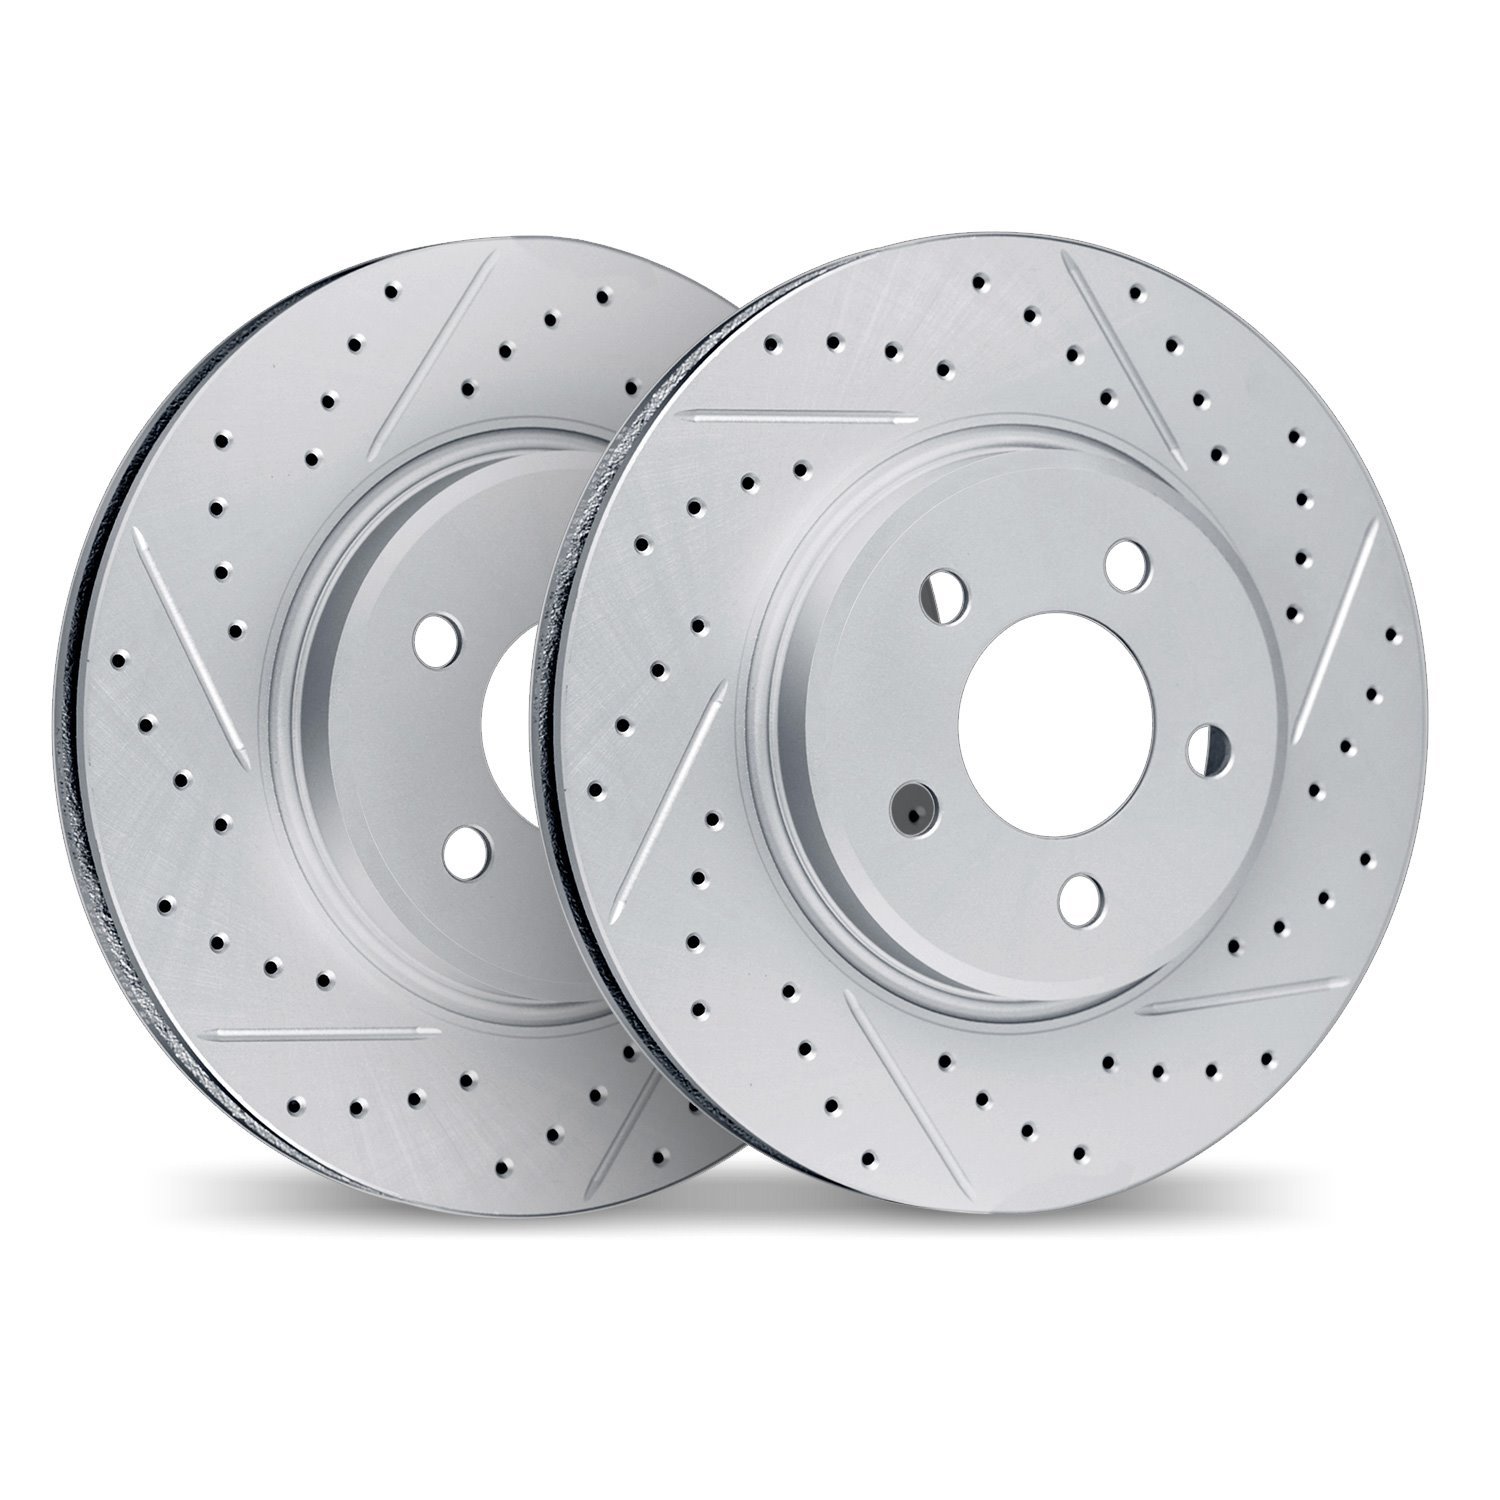 2002-75018 Geoperformance Drilled/Slotted Brake Rotors, 1992-2000 Lexus/Toyota/Scion, Position: Rear